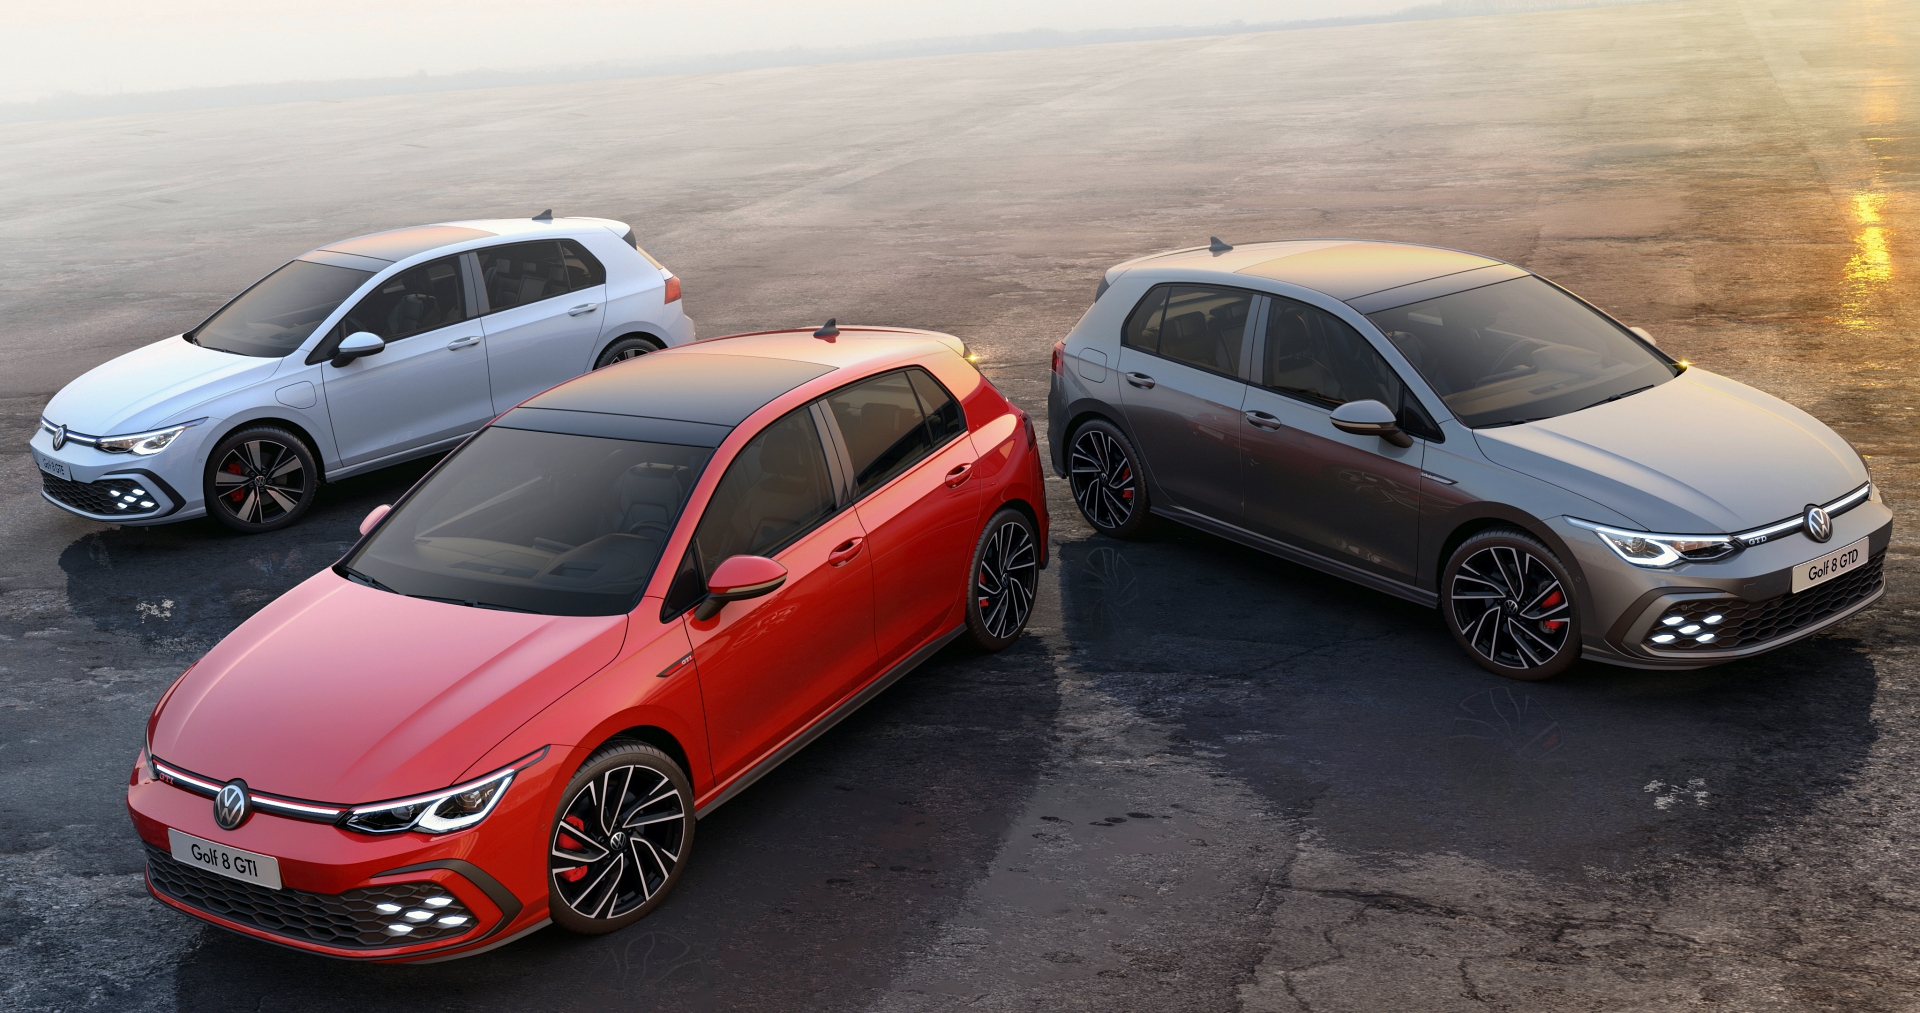 Volkswagen Golf Gte Plug-In Hybrid Next To The Eighth Generation Gti And Gtd.